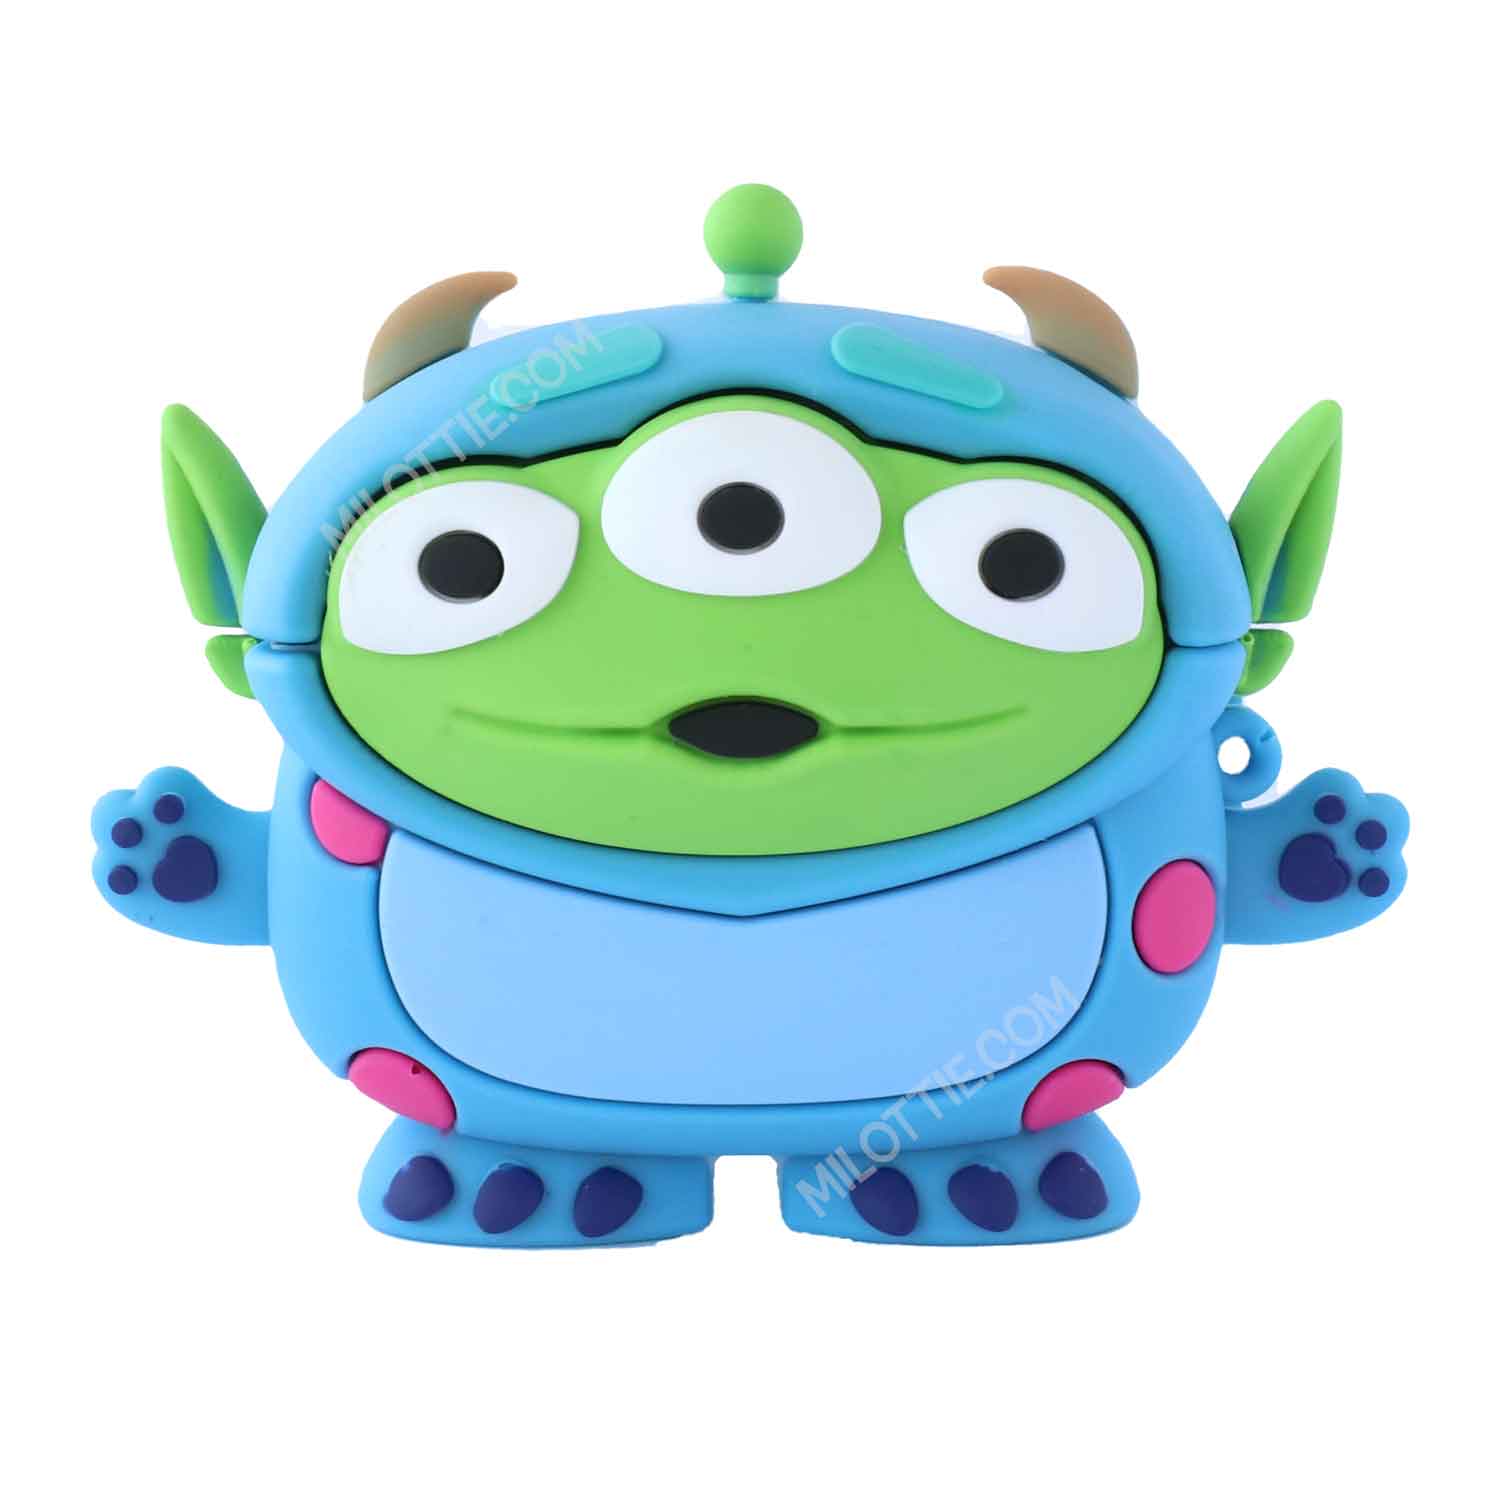 Toy Story Alien in Sulley Monster Costume Airpods Case - 0